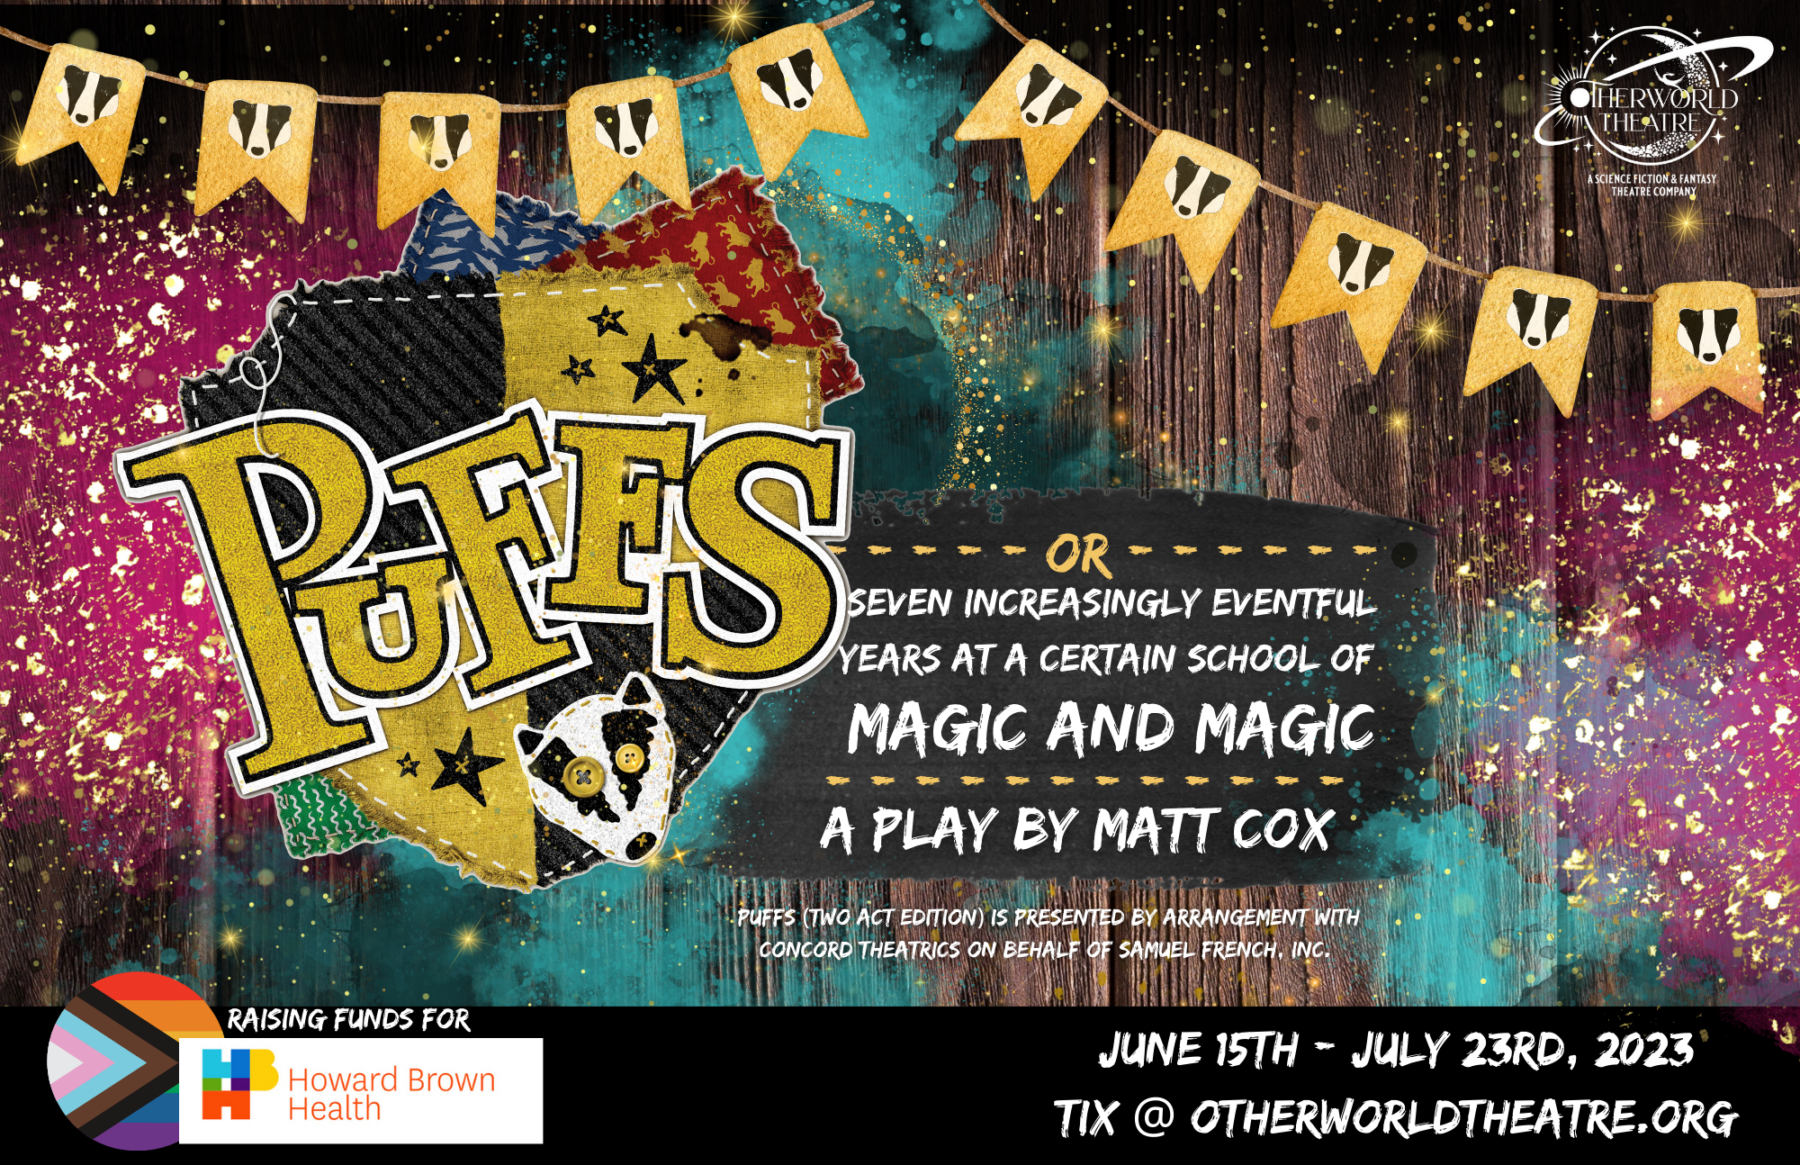 Puffs the Play Poster (2)